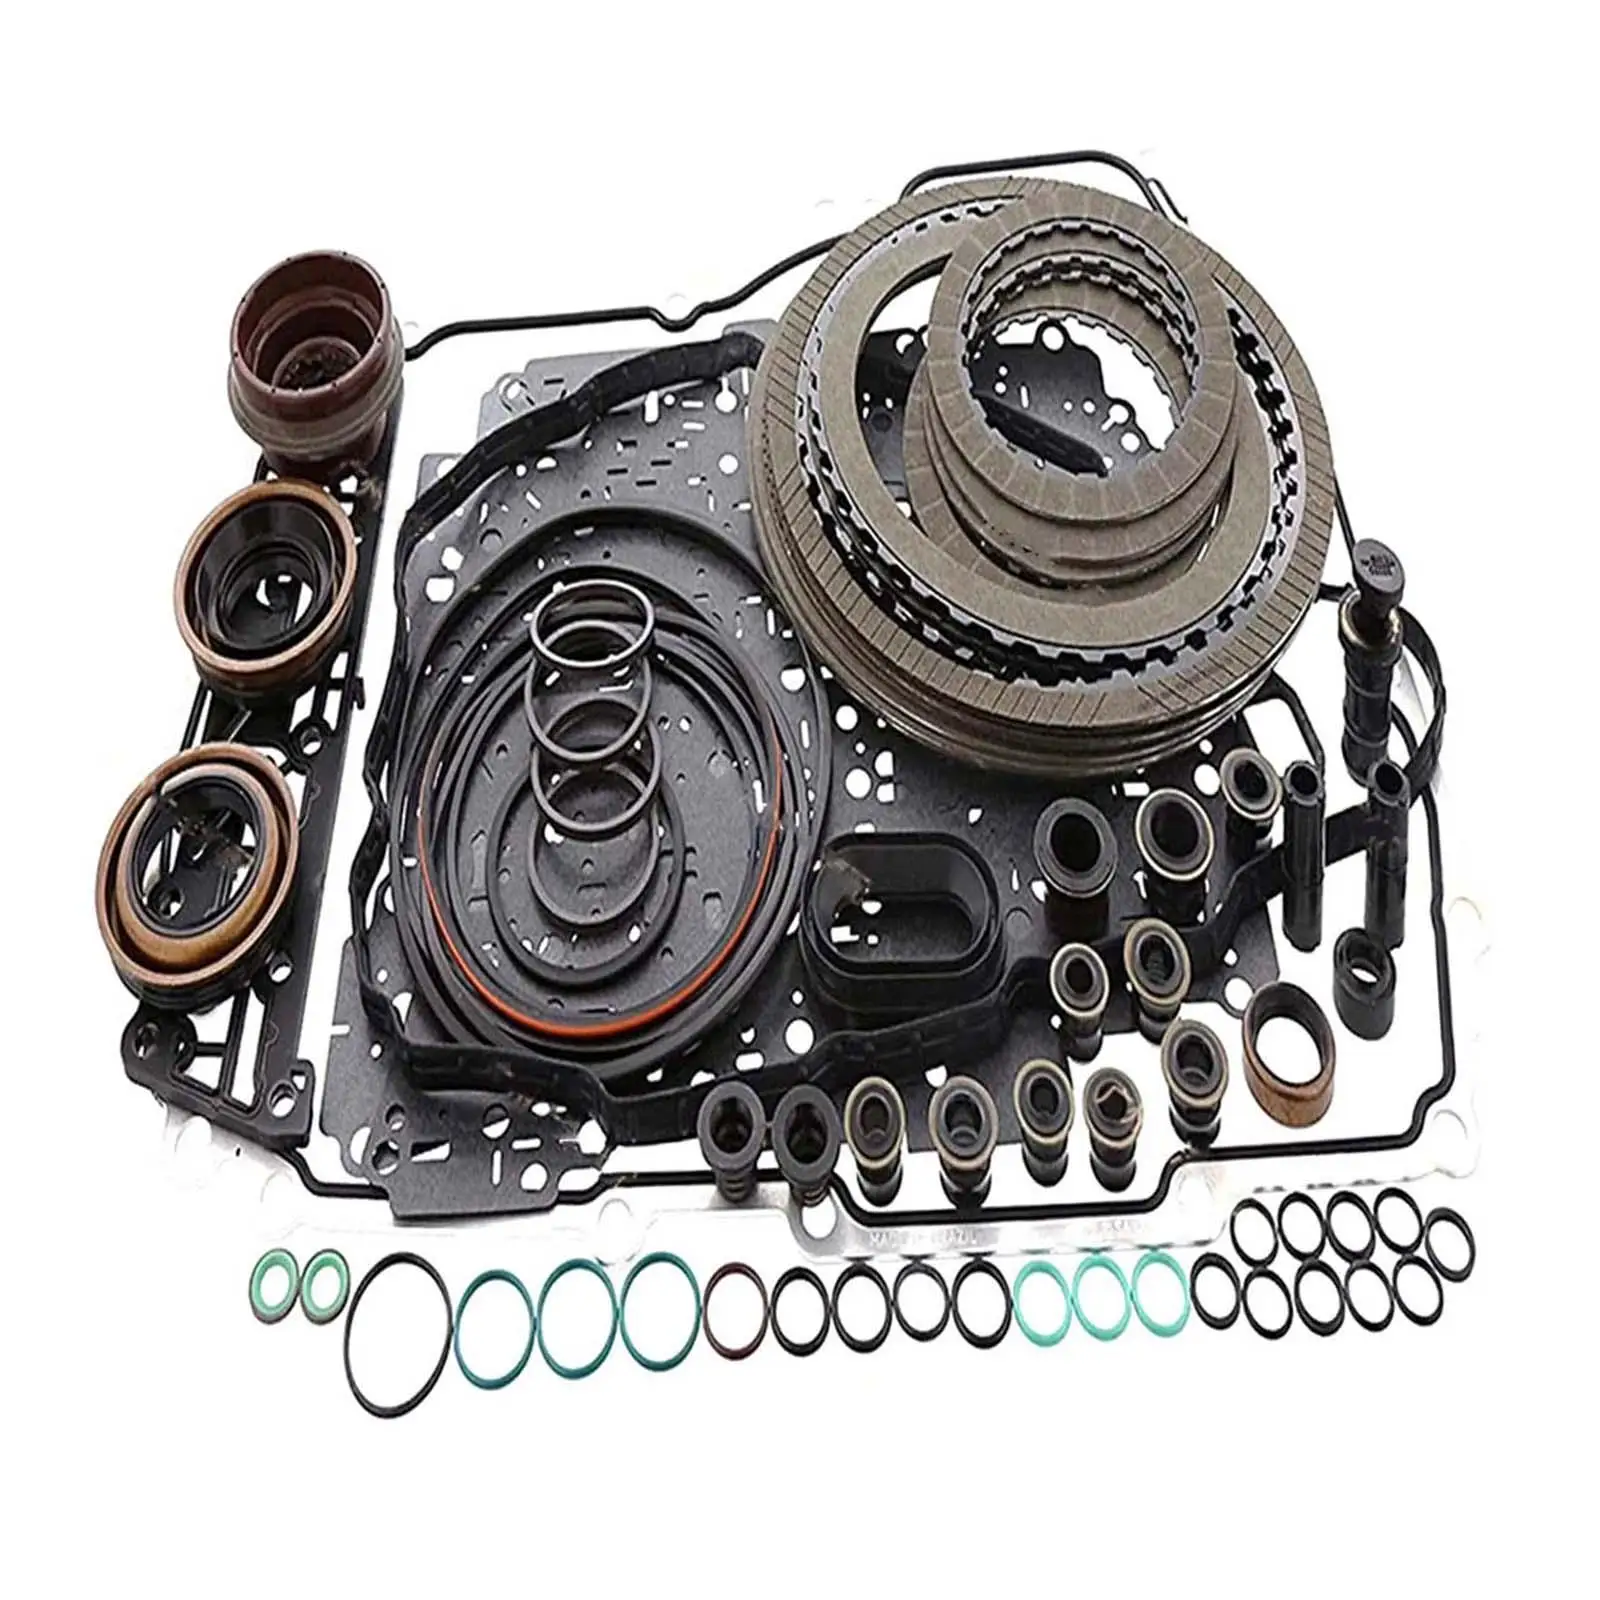 6T40E 6T45E Transmission Overhaul Rebuild B204881A Repair Parts Replacement Stable Performance Professional for Buick